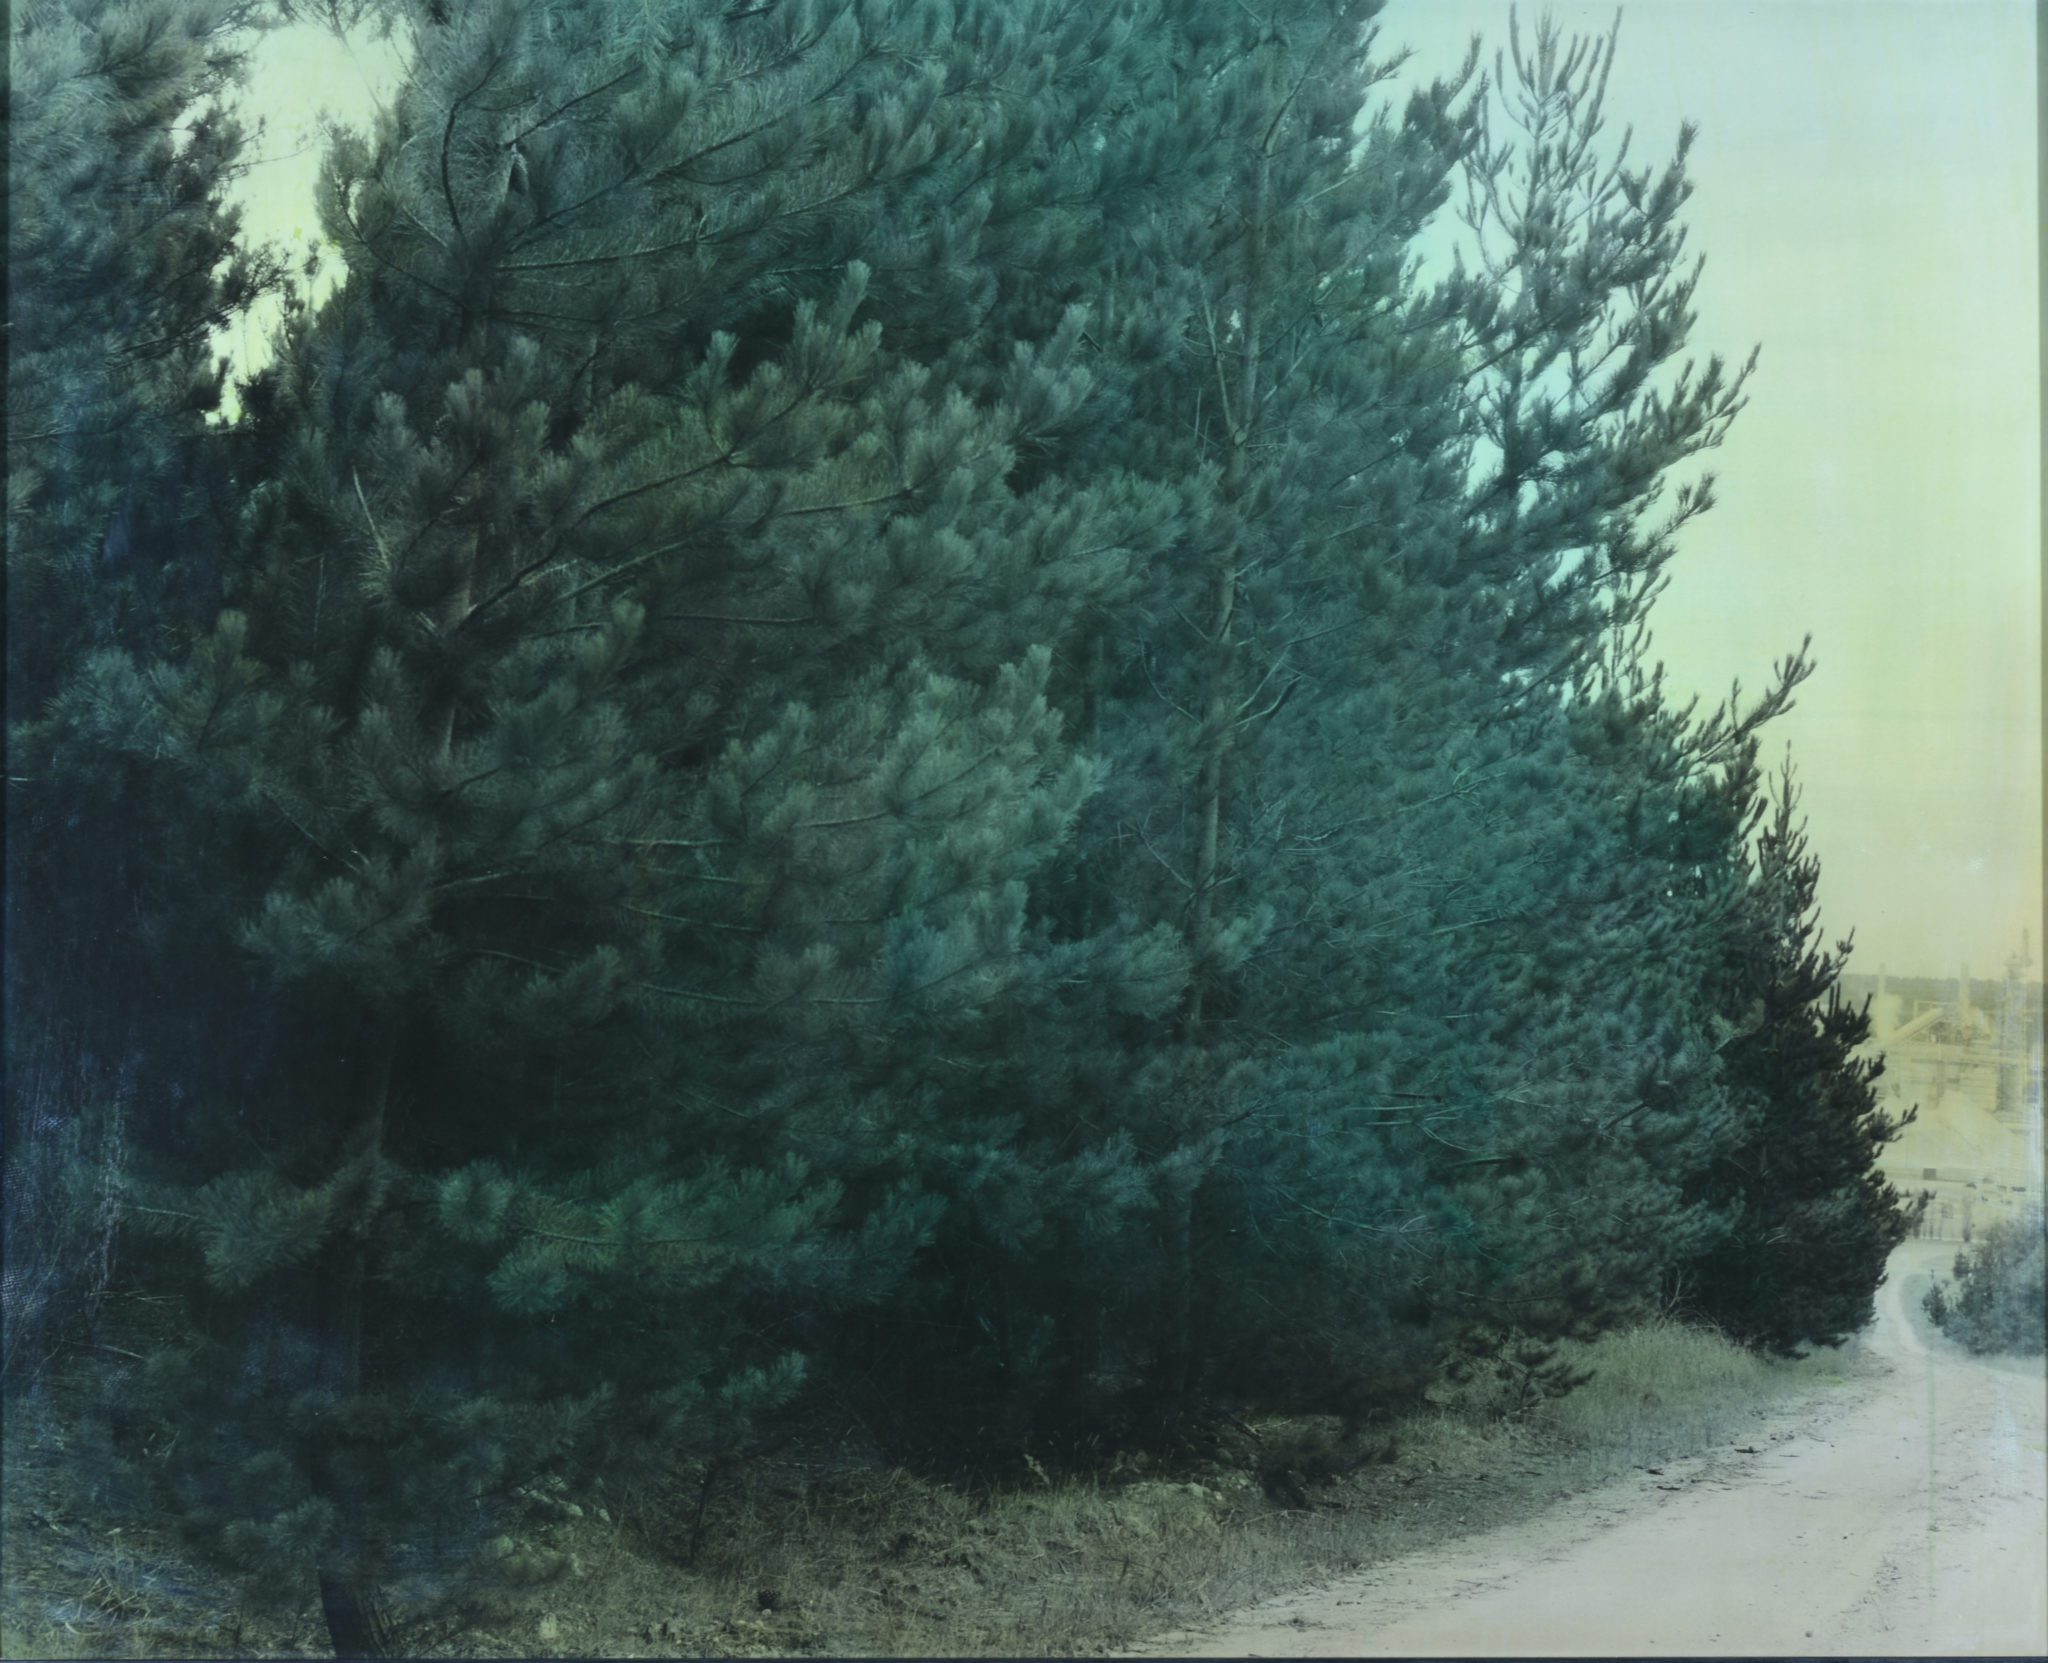 Janina Green, Untitled (from the Plantation series), 1996, Hand coloured Silver Gelatin print, 84 x 104 cm, Latrobe Regional Gallery Collection, gift of the artist, 1997. 